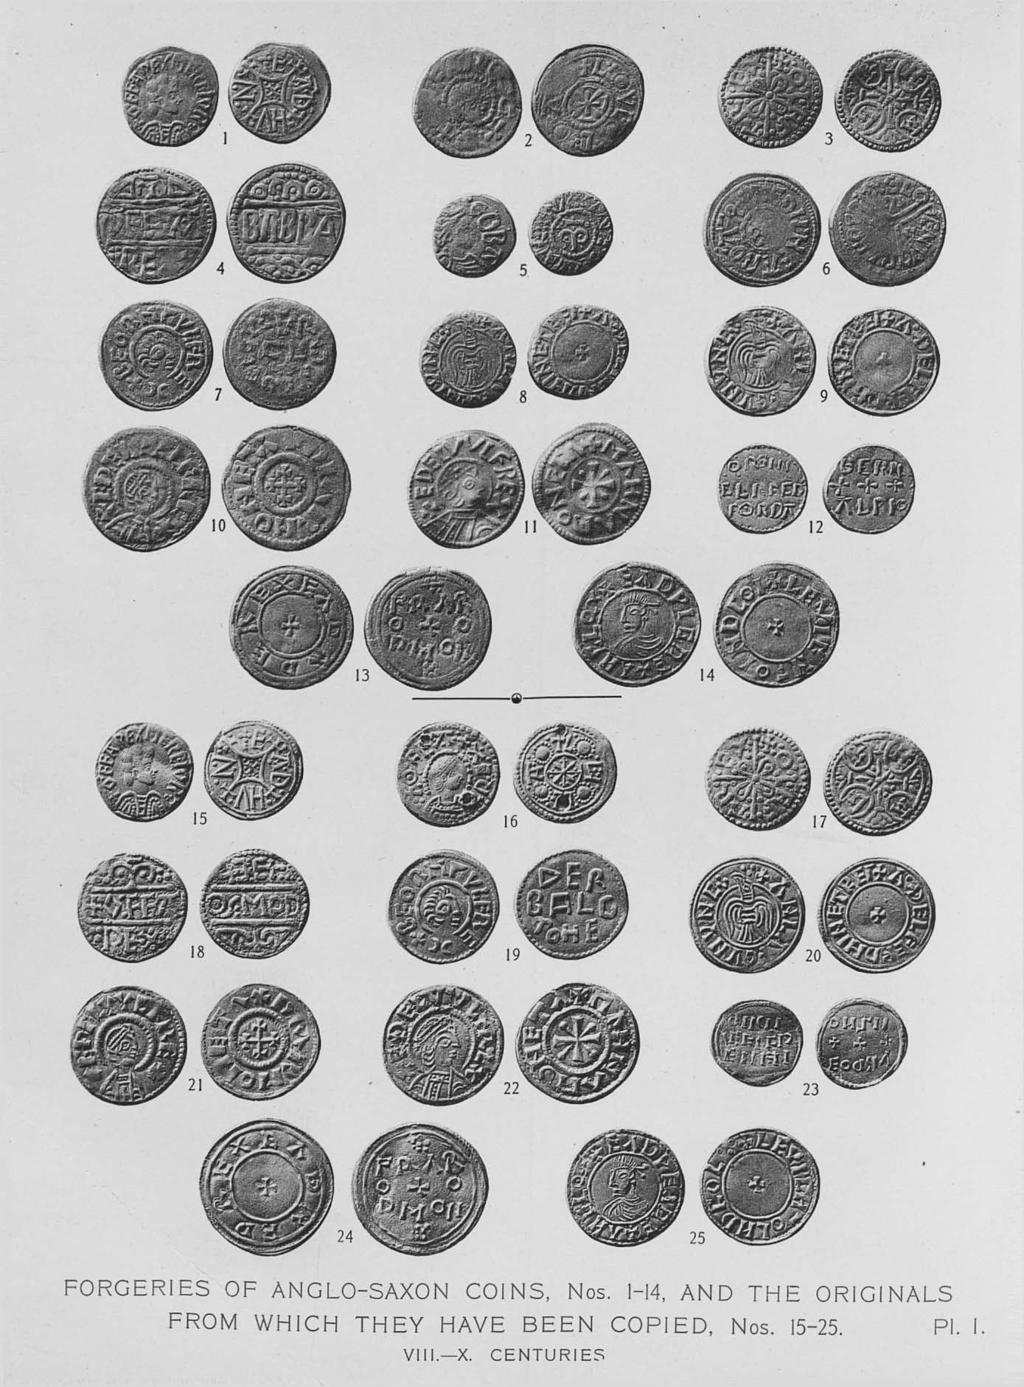 FORGERIES OF ANGLO-SAXON COINS, Nos.